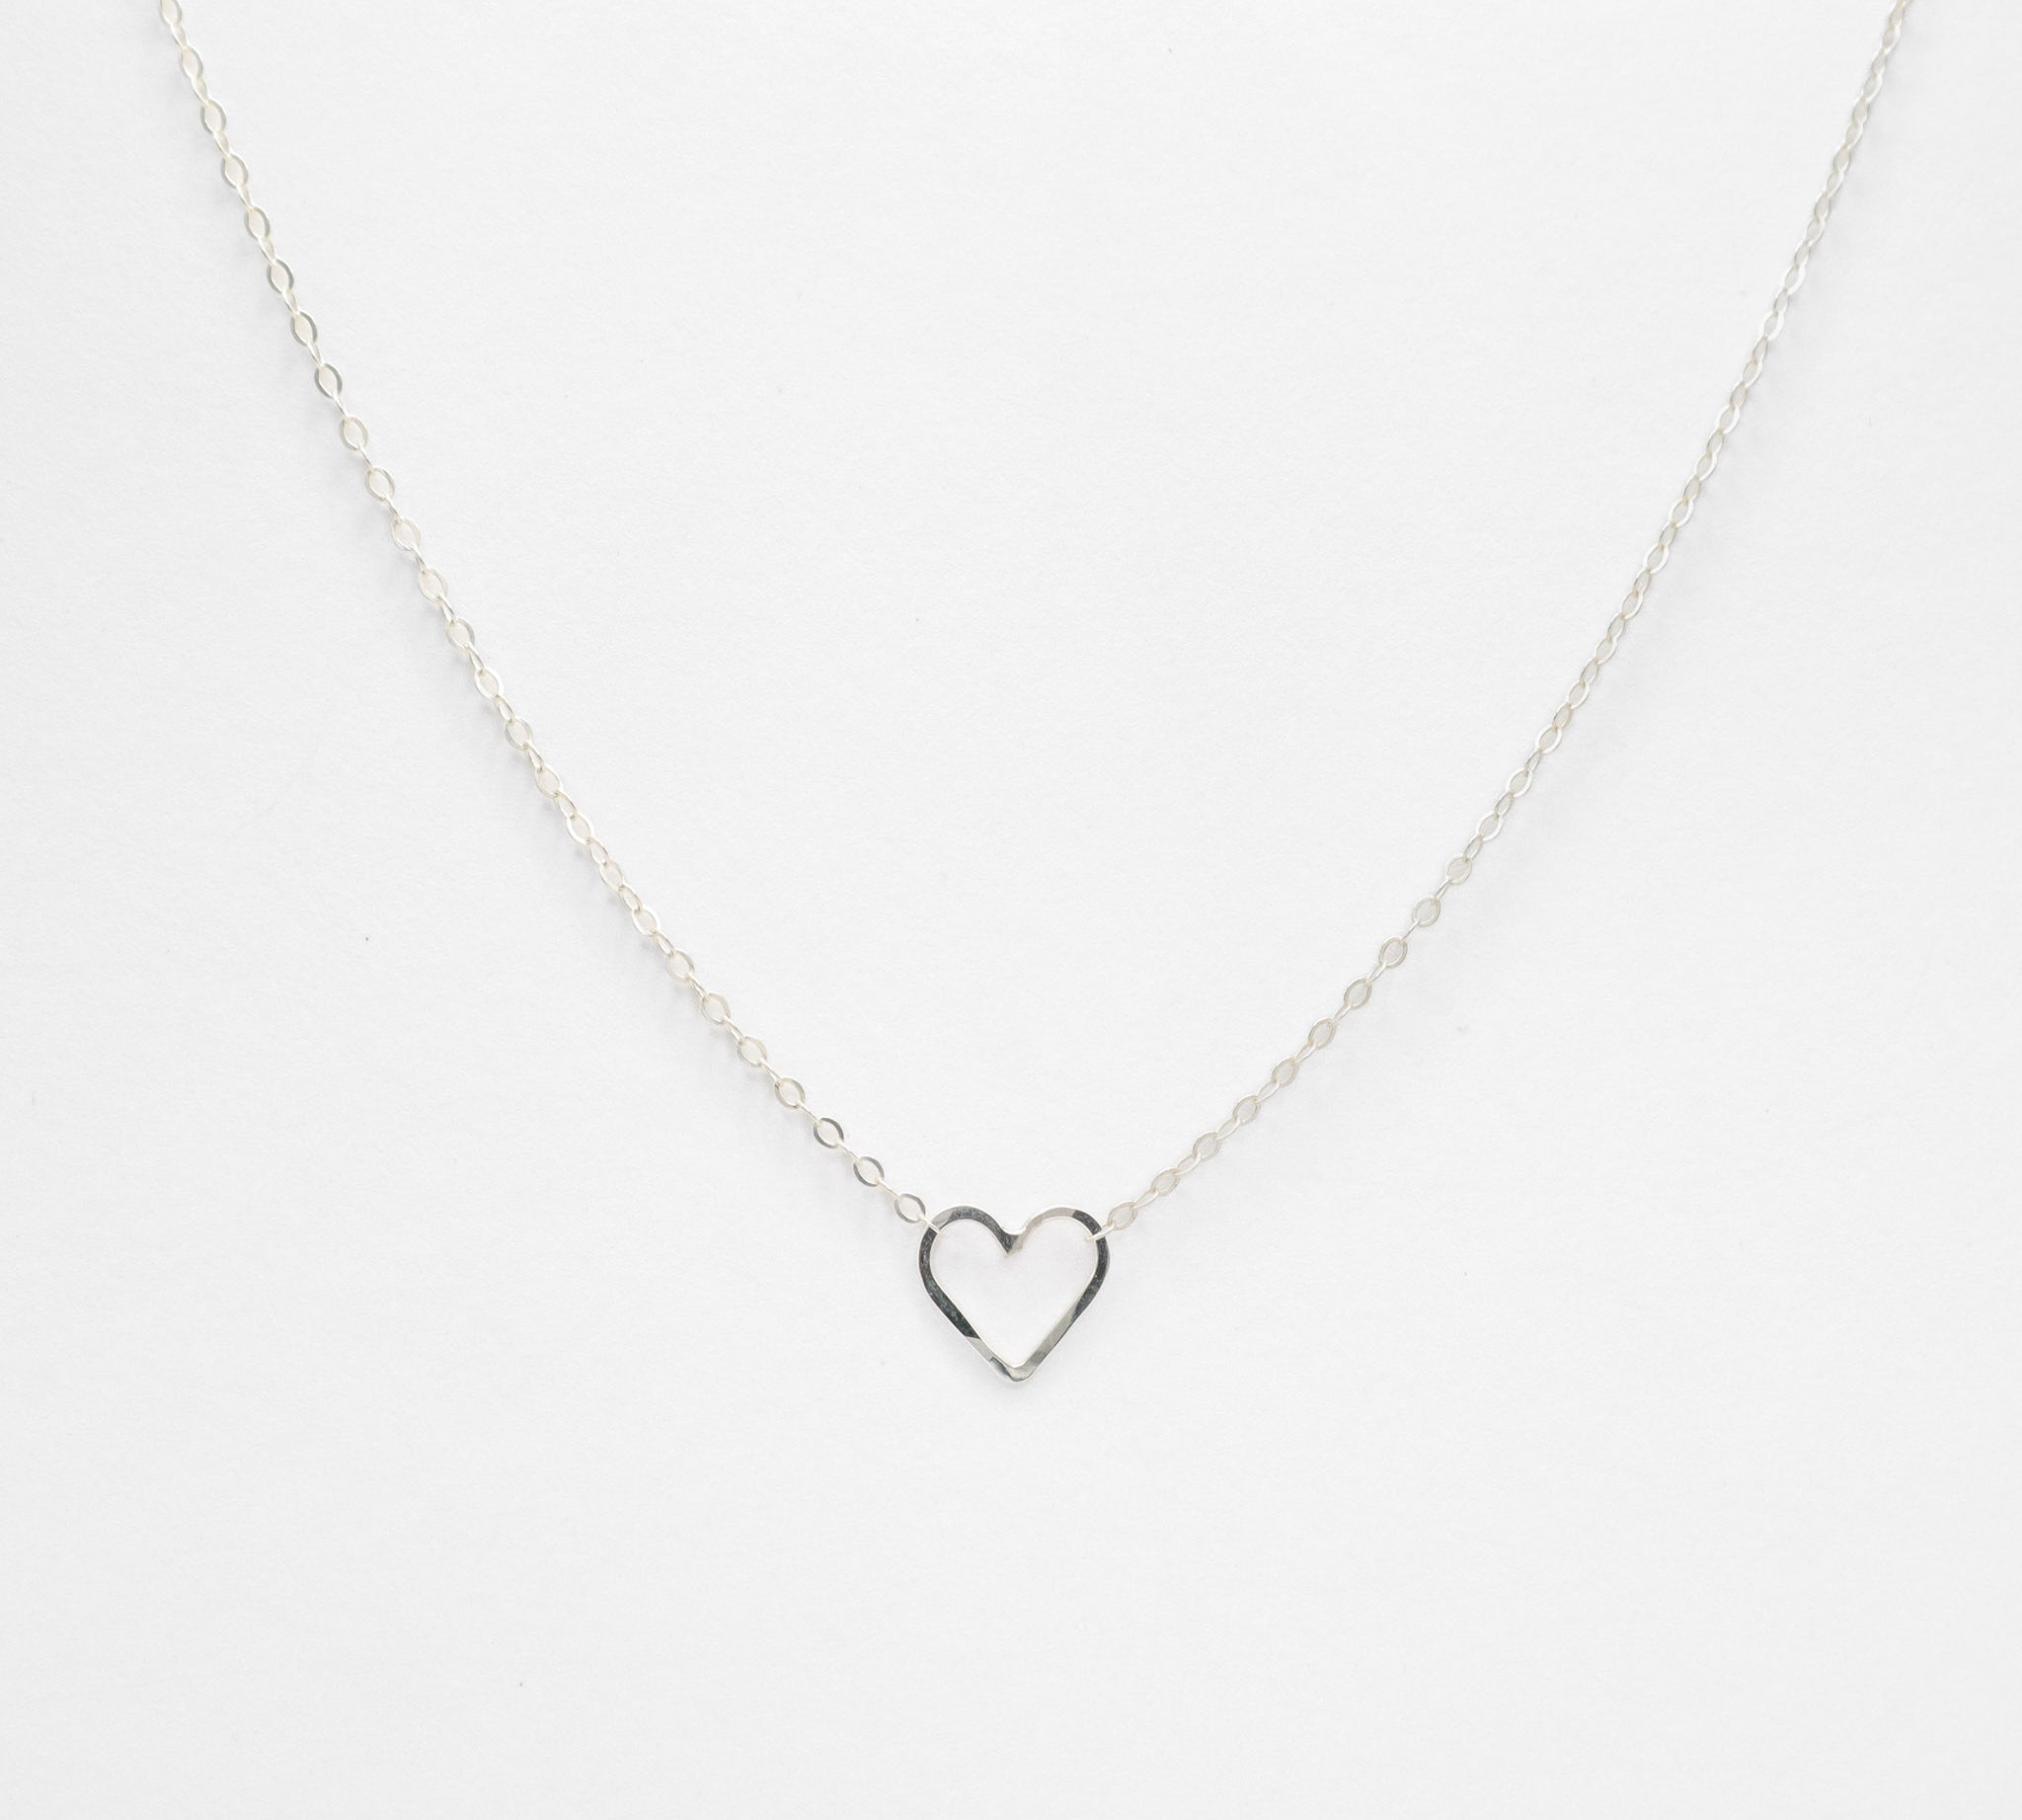 Shop All - Collective Hearts Jewelry